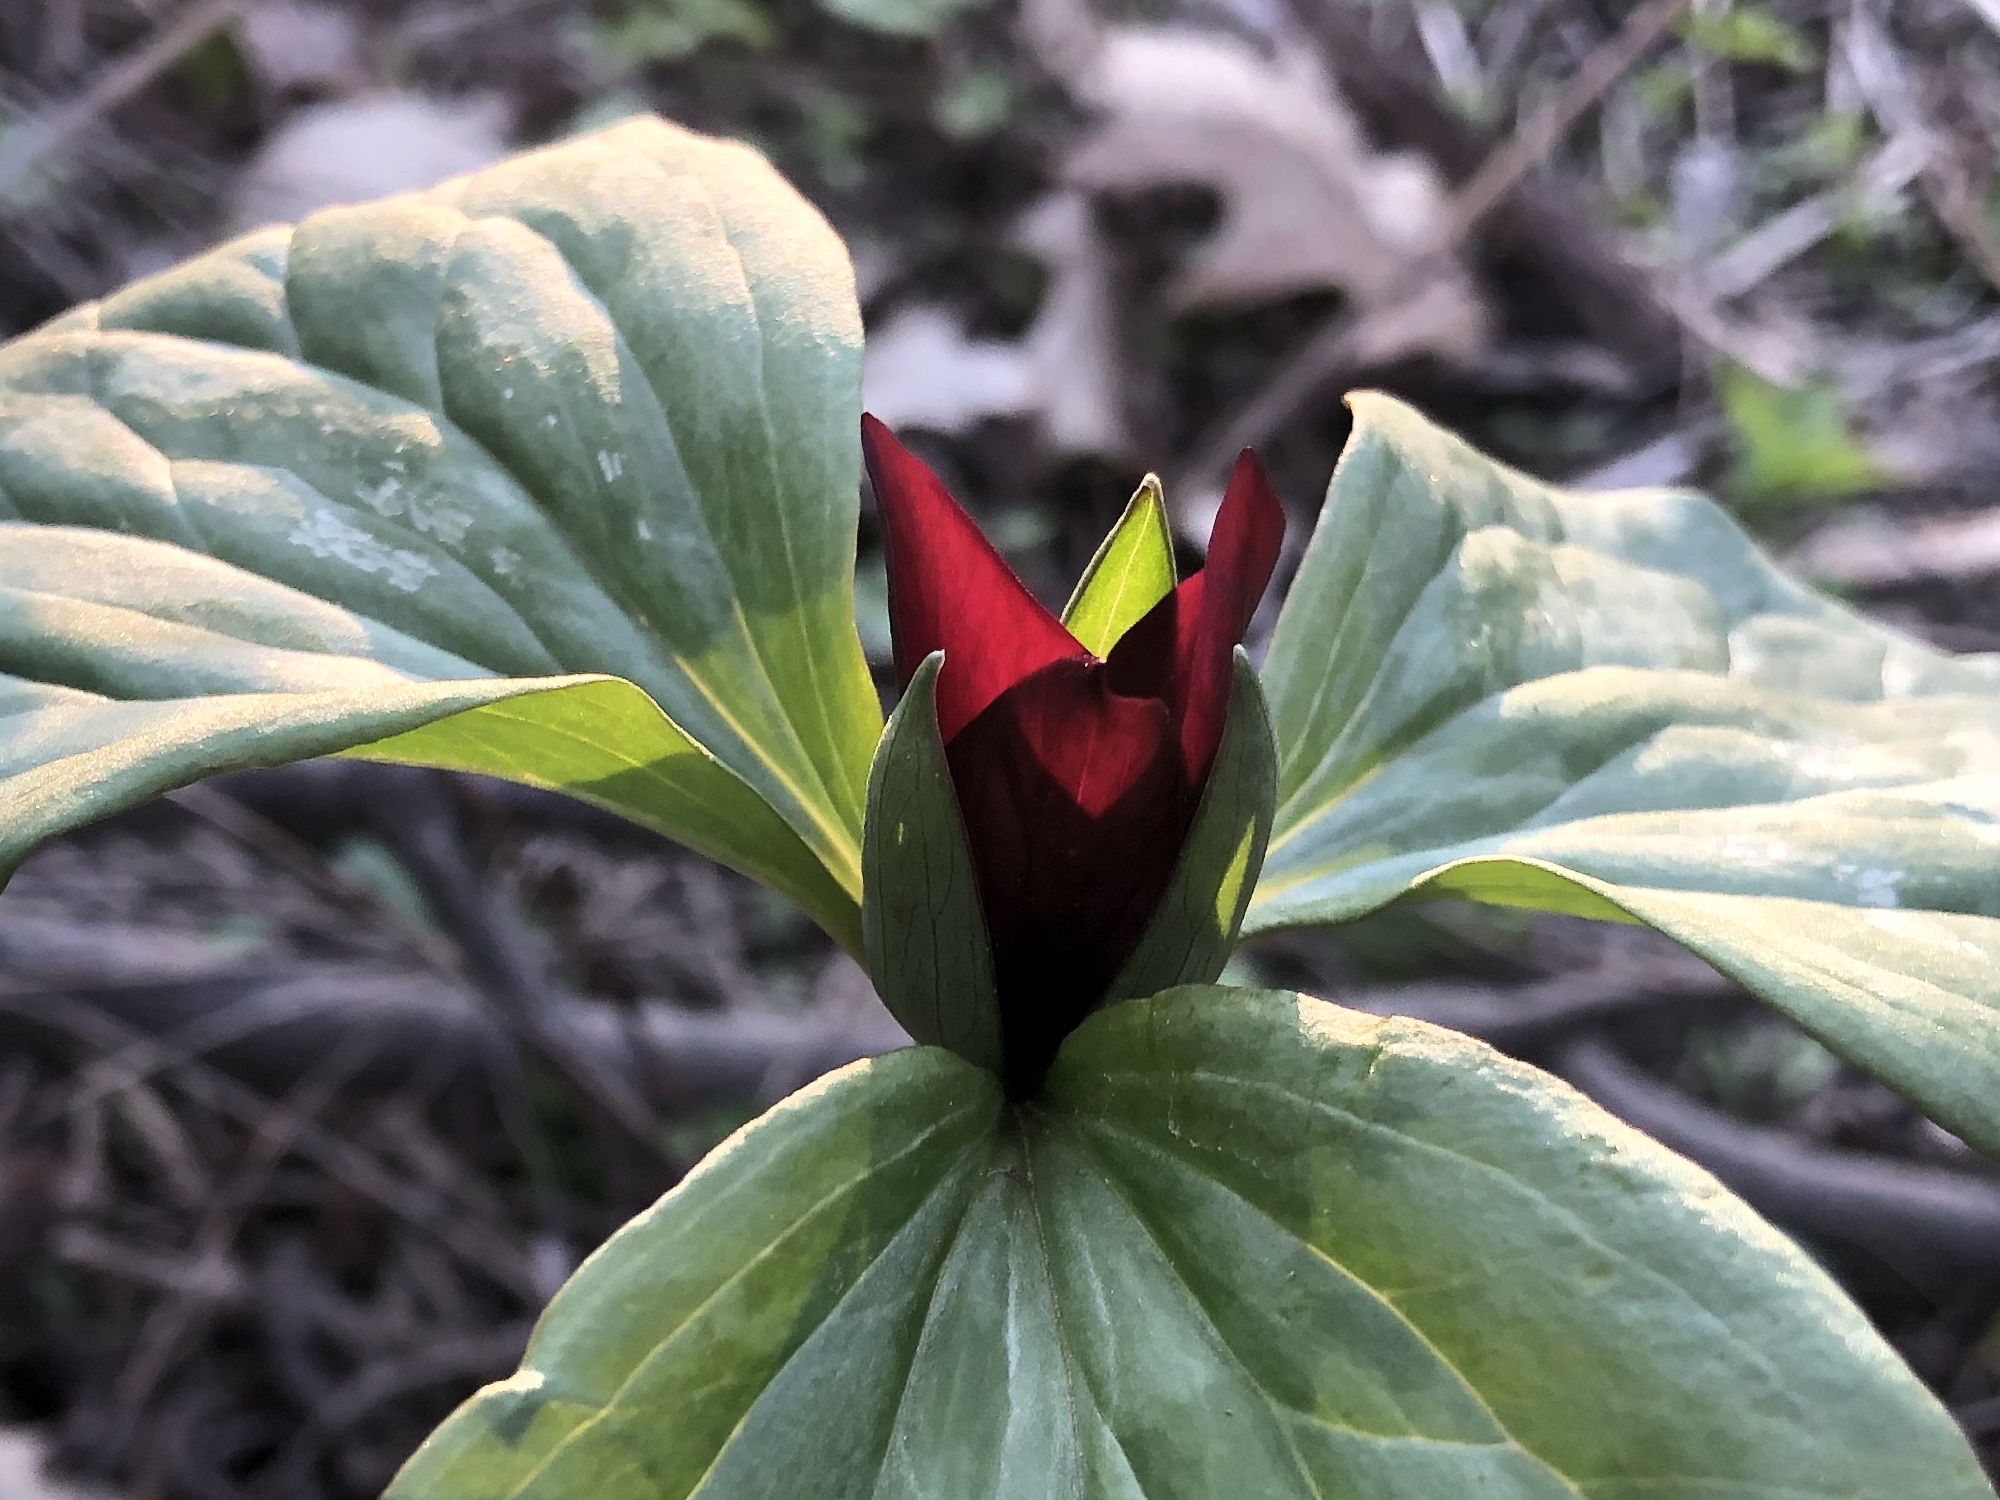 Trillium off of bike path between Marion Dunn and Duck Pond on April 26, 2021.